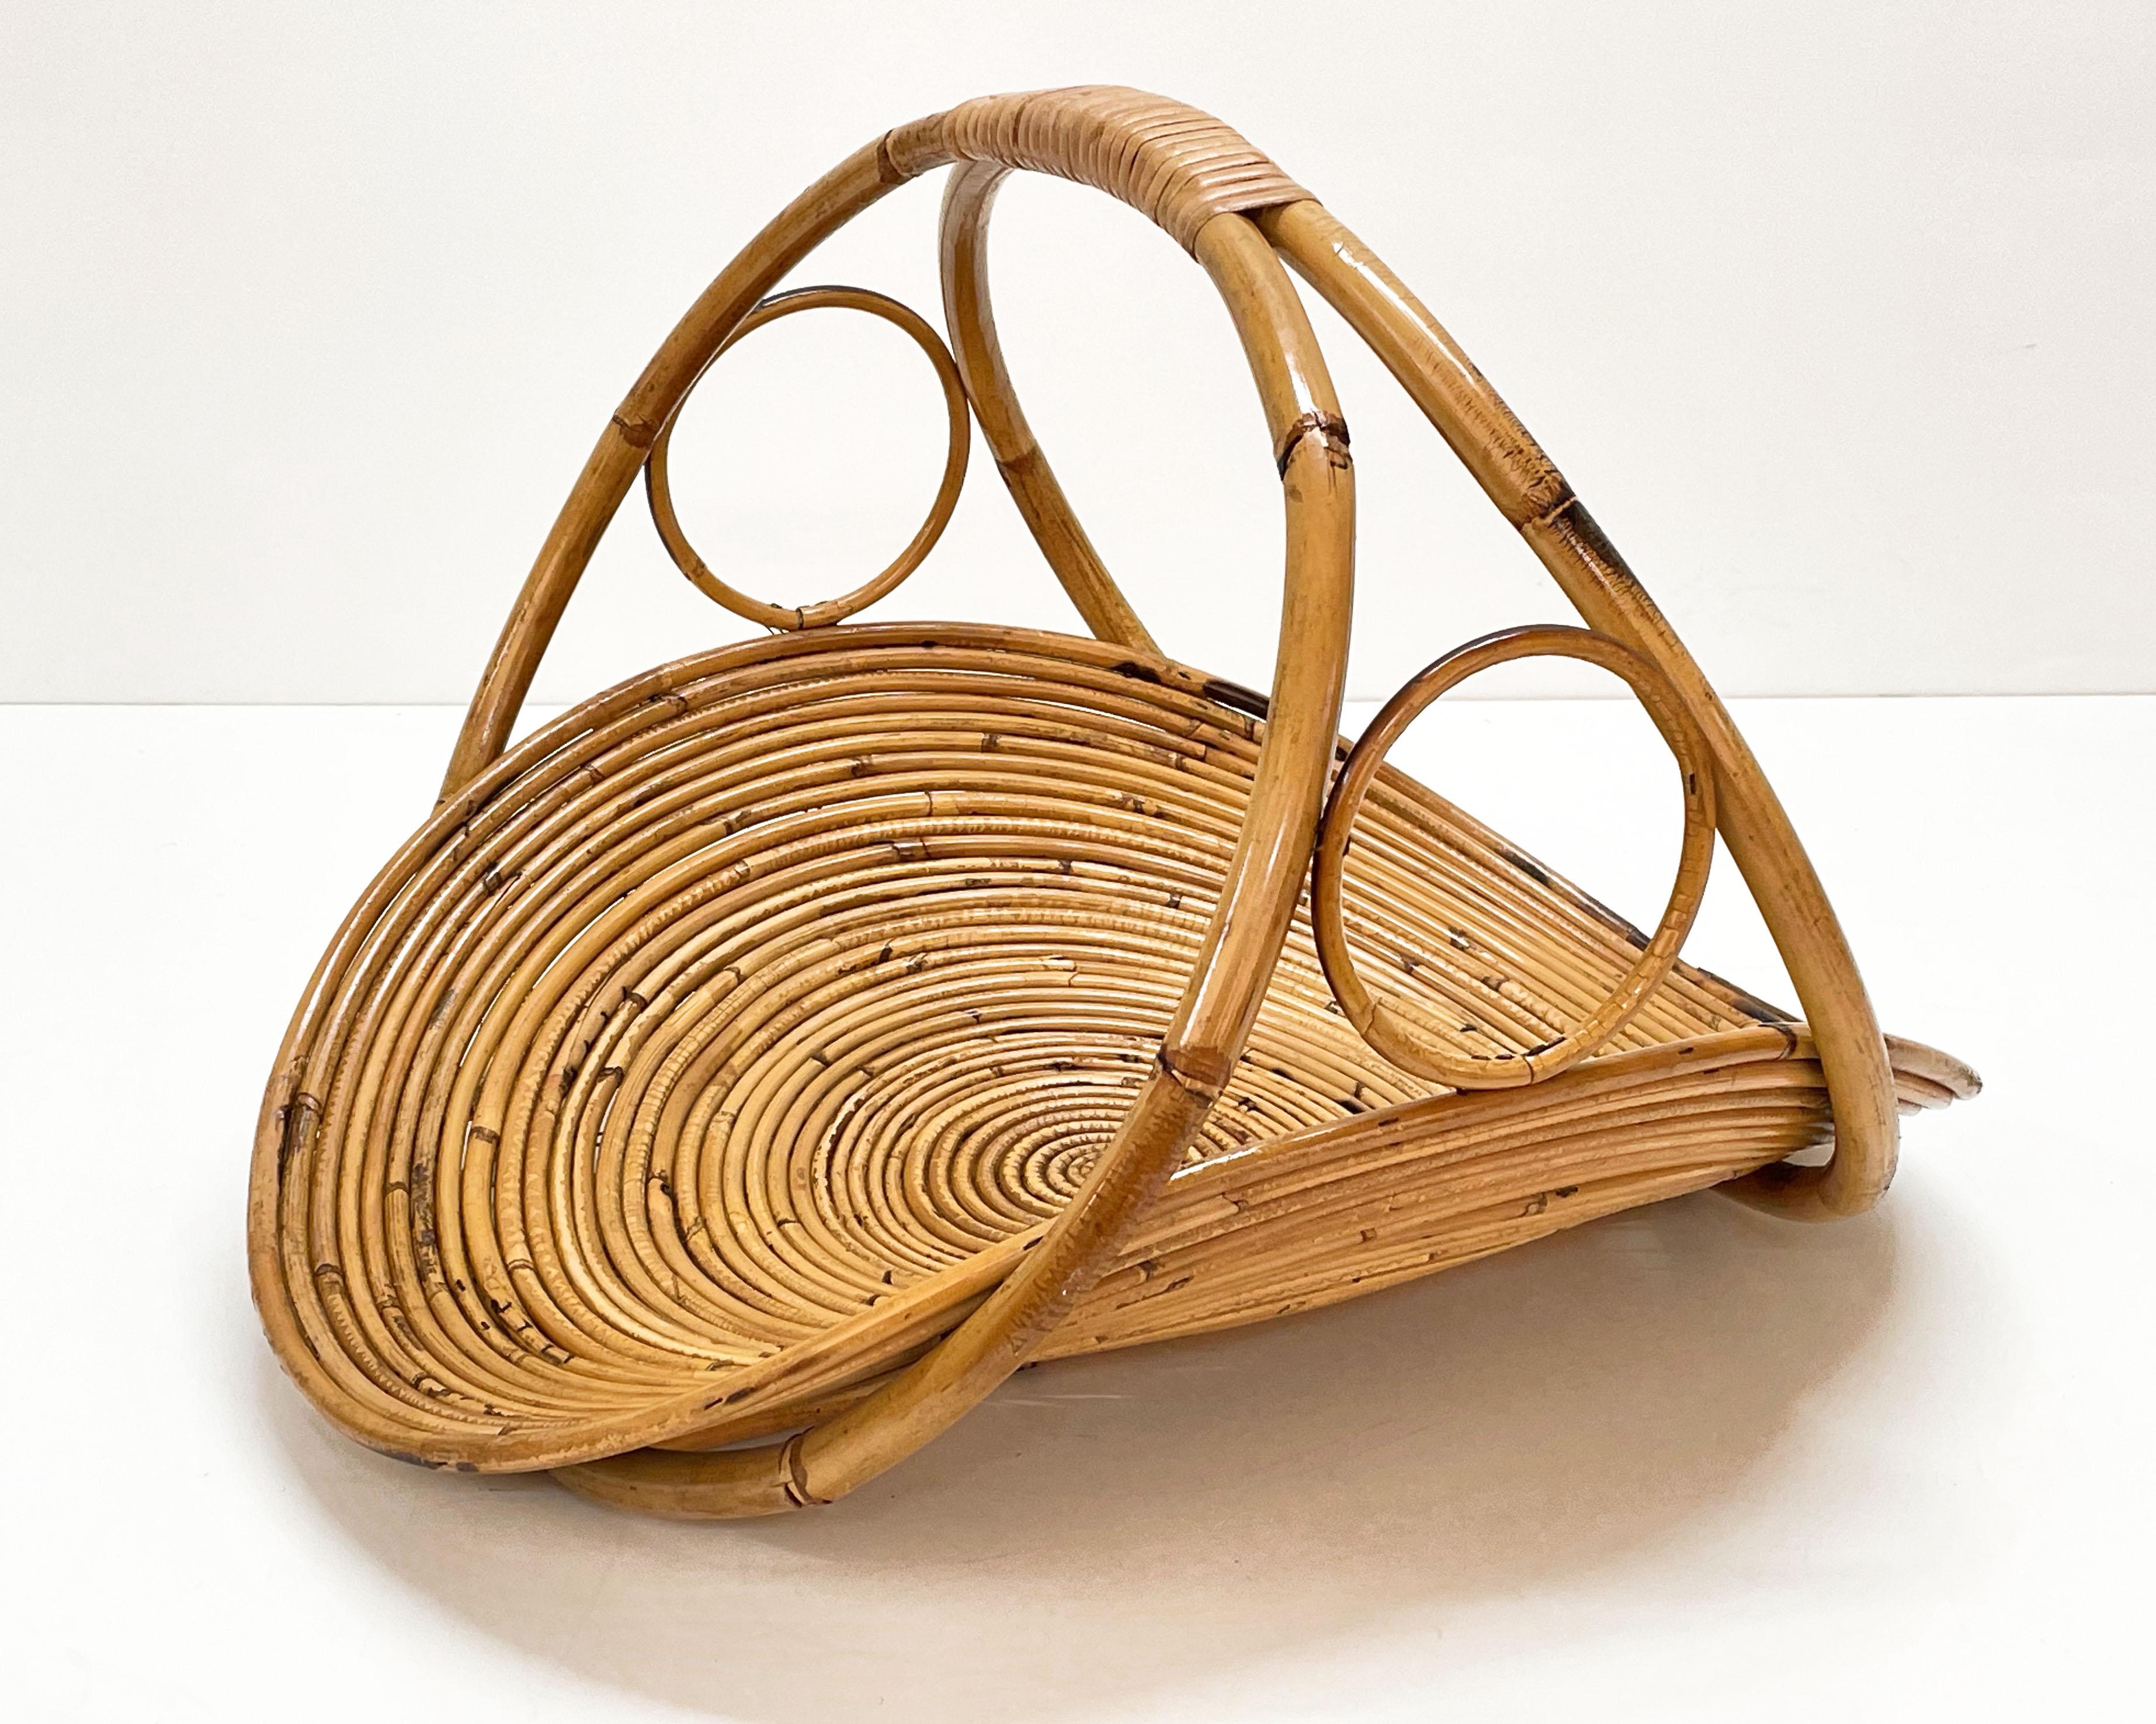 Midcentury French Riviera bamboo and rattan magazine rack. This item was produced in Italy during the 1960s.

This wonderful piece is very rare as it is in perfect balance, standing perfectly even if just the central part is on the ground. On the